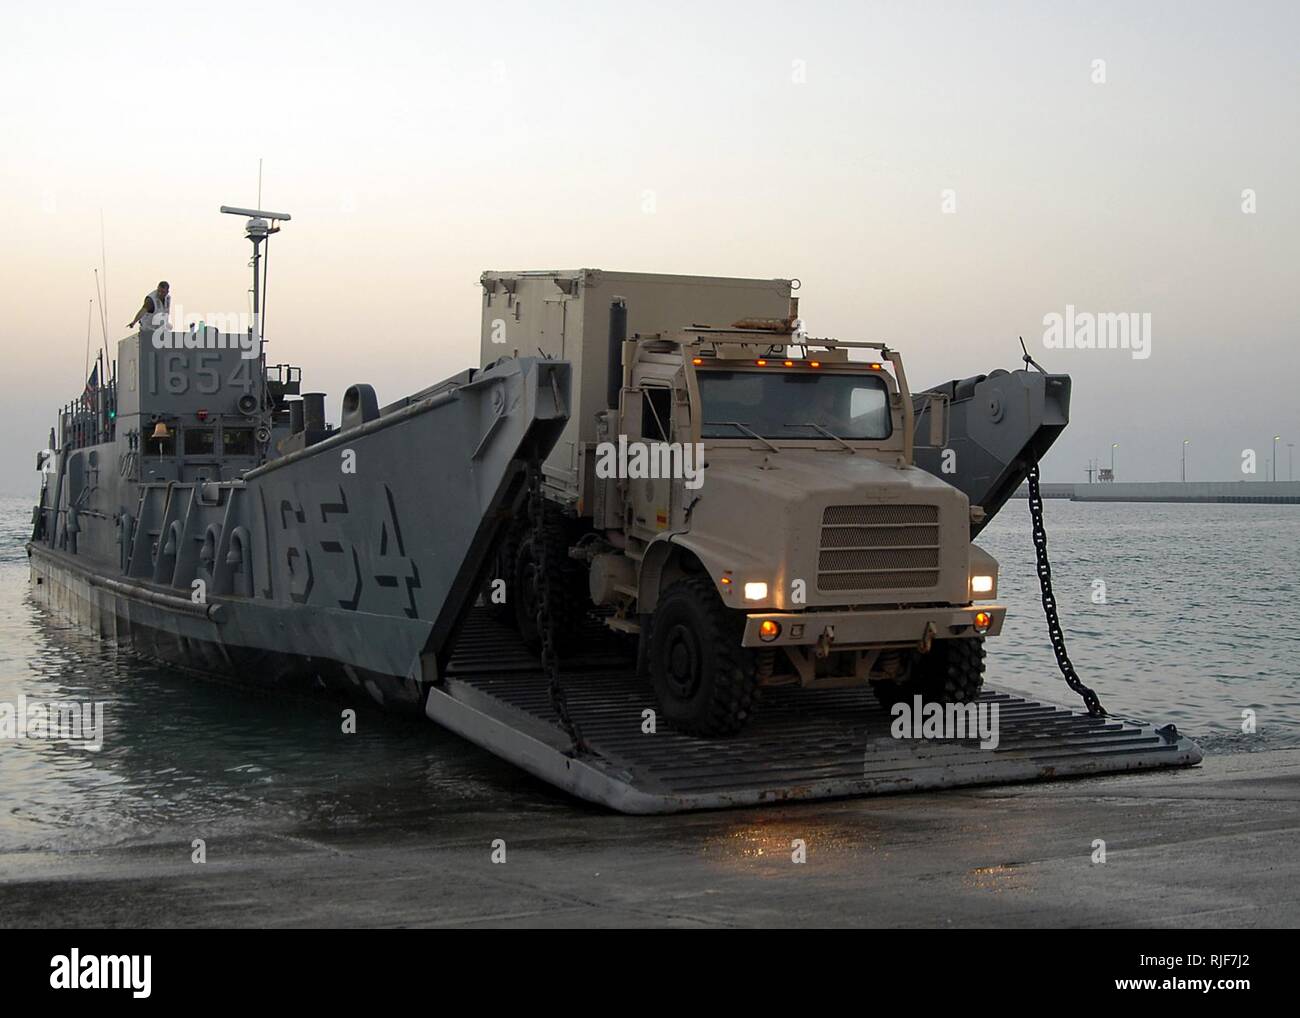 Vehicles are offloaded from a landing craft utility assigned to Assault Craft Unit 4 during amphibious operations with the amphibious dock landing ship USS Carter Hall. Carter Hall is deployed as part of the Iwo Jima Expeditionary Strike Group supporting maritime security operations in the U.S. 5th Fleet area of responsibility. Stock Photo